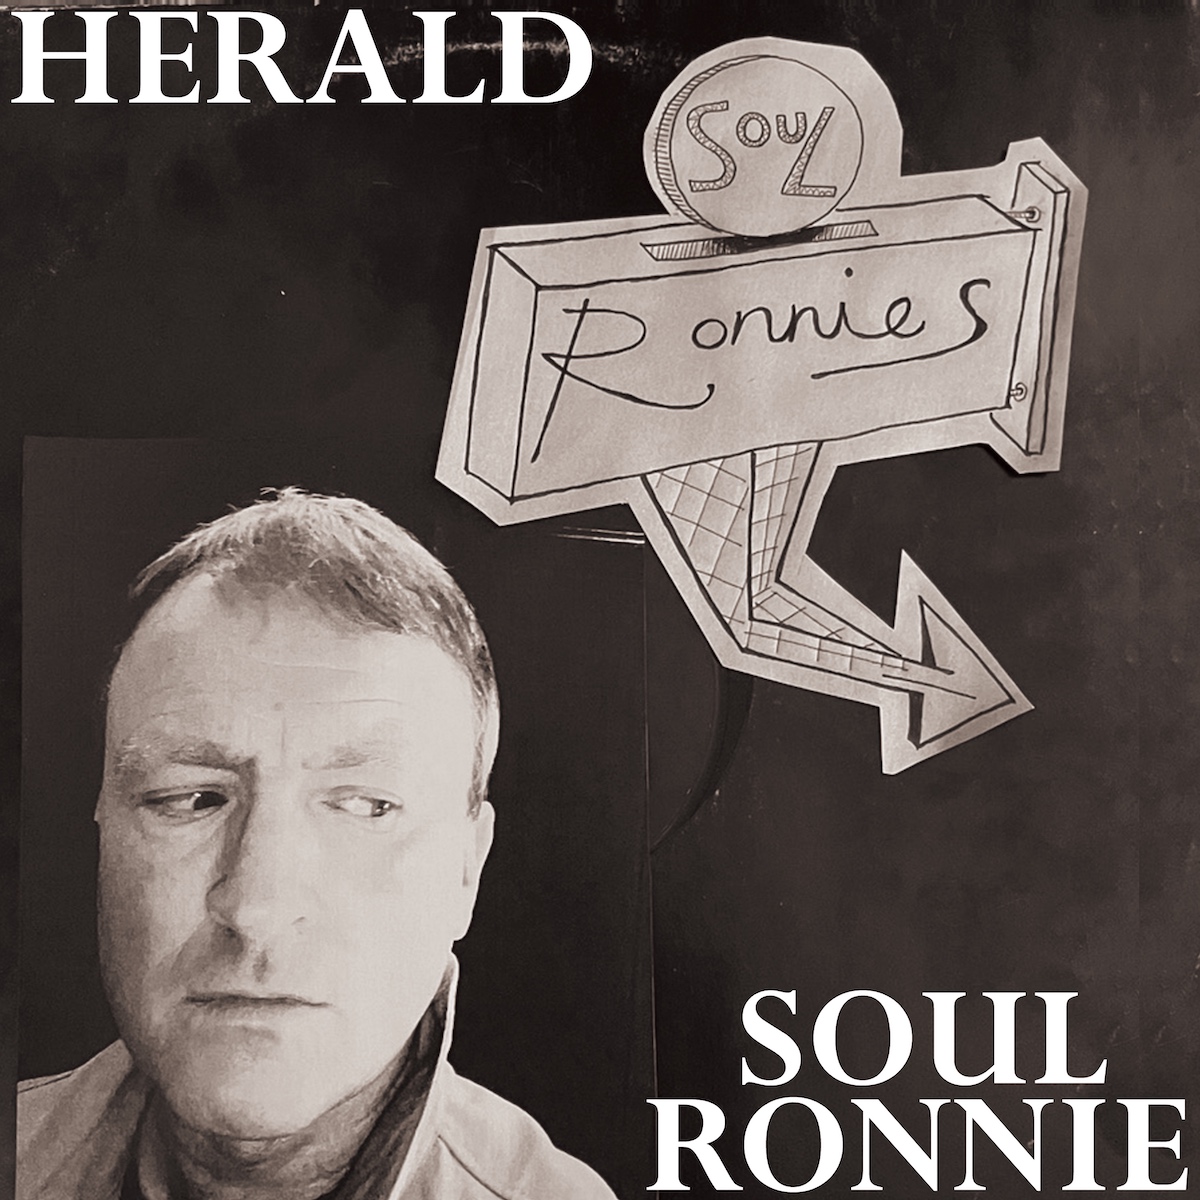 LISTEN: “Soul Ronnie” by Herald